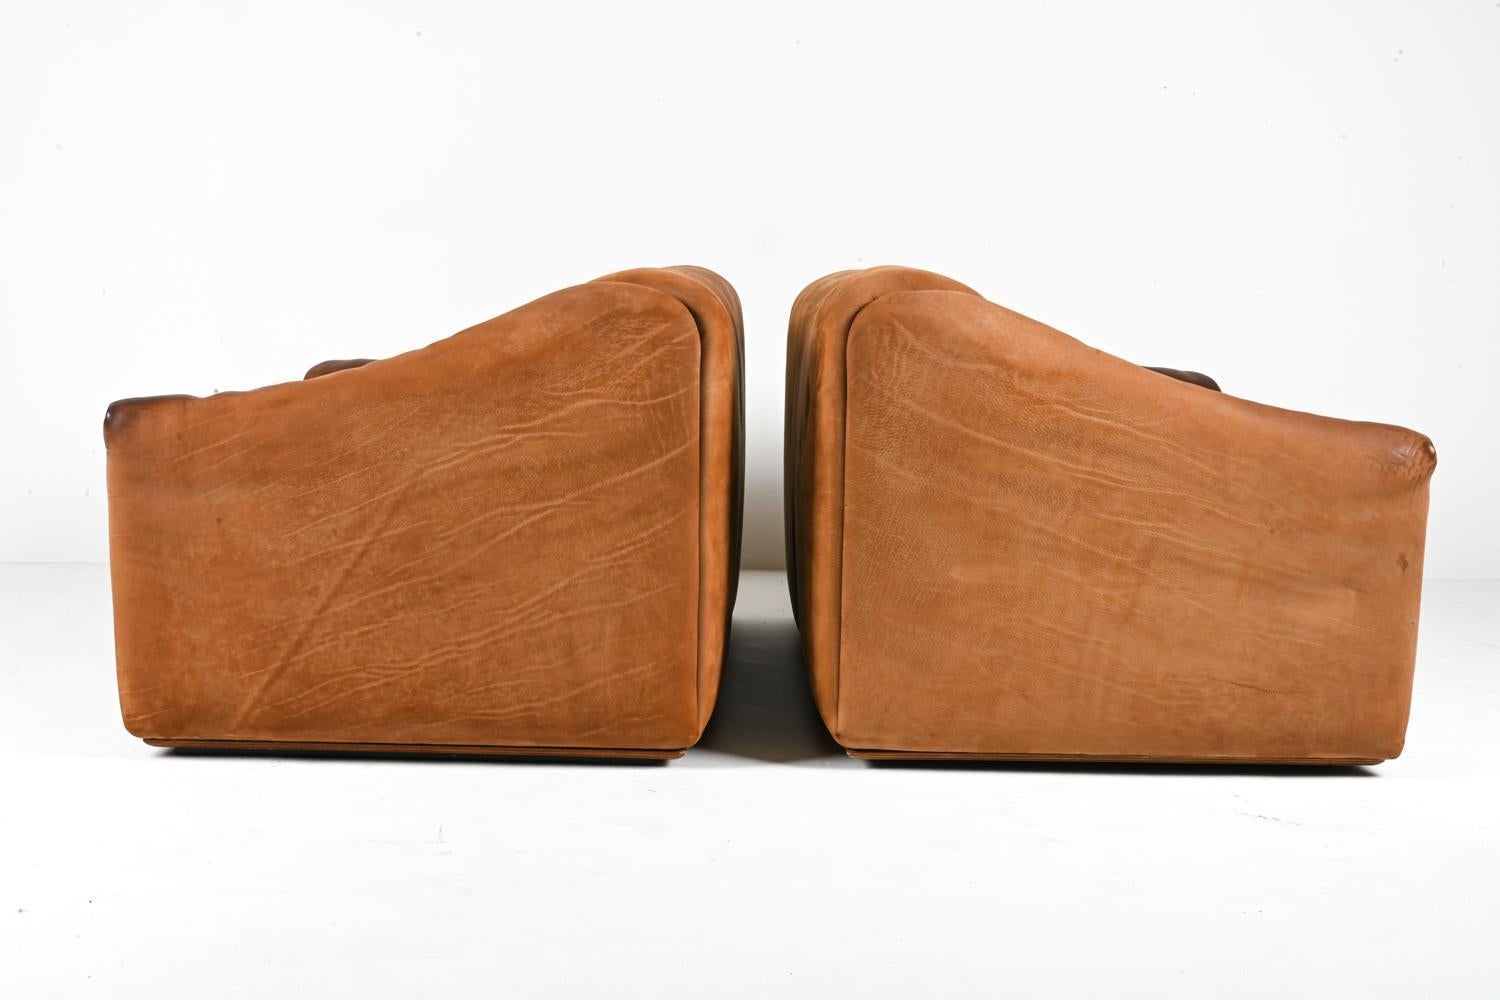 Pair of De Sede DS-47 Two-Seat Sofas in Nubuck Leather, c. 1970's For Sale 13